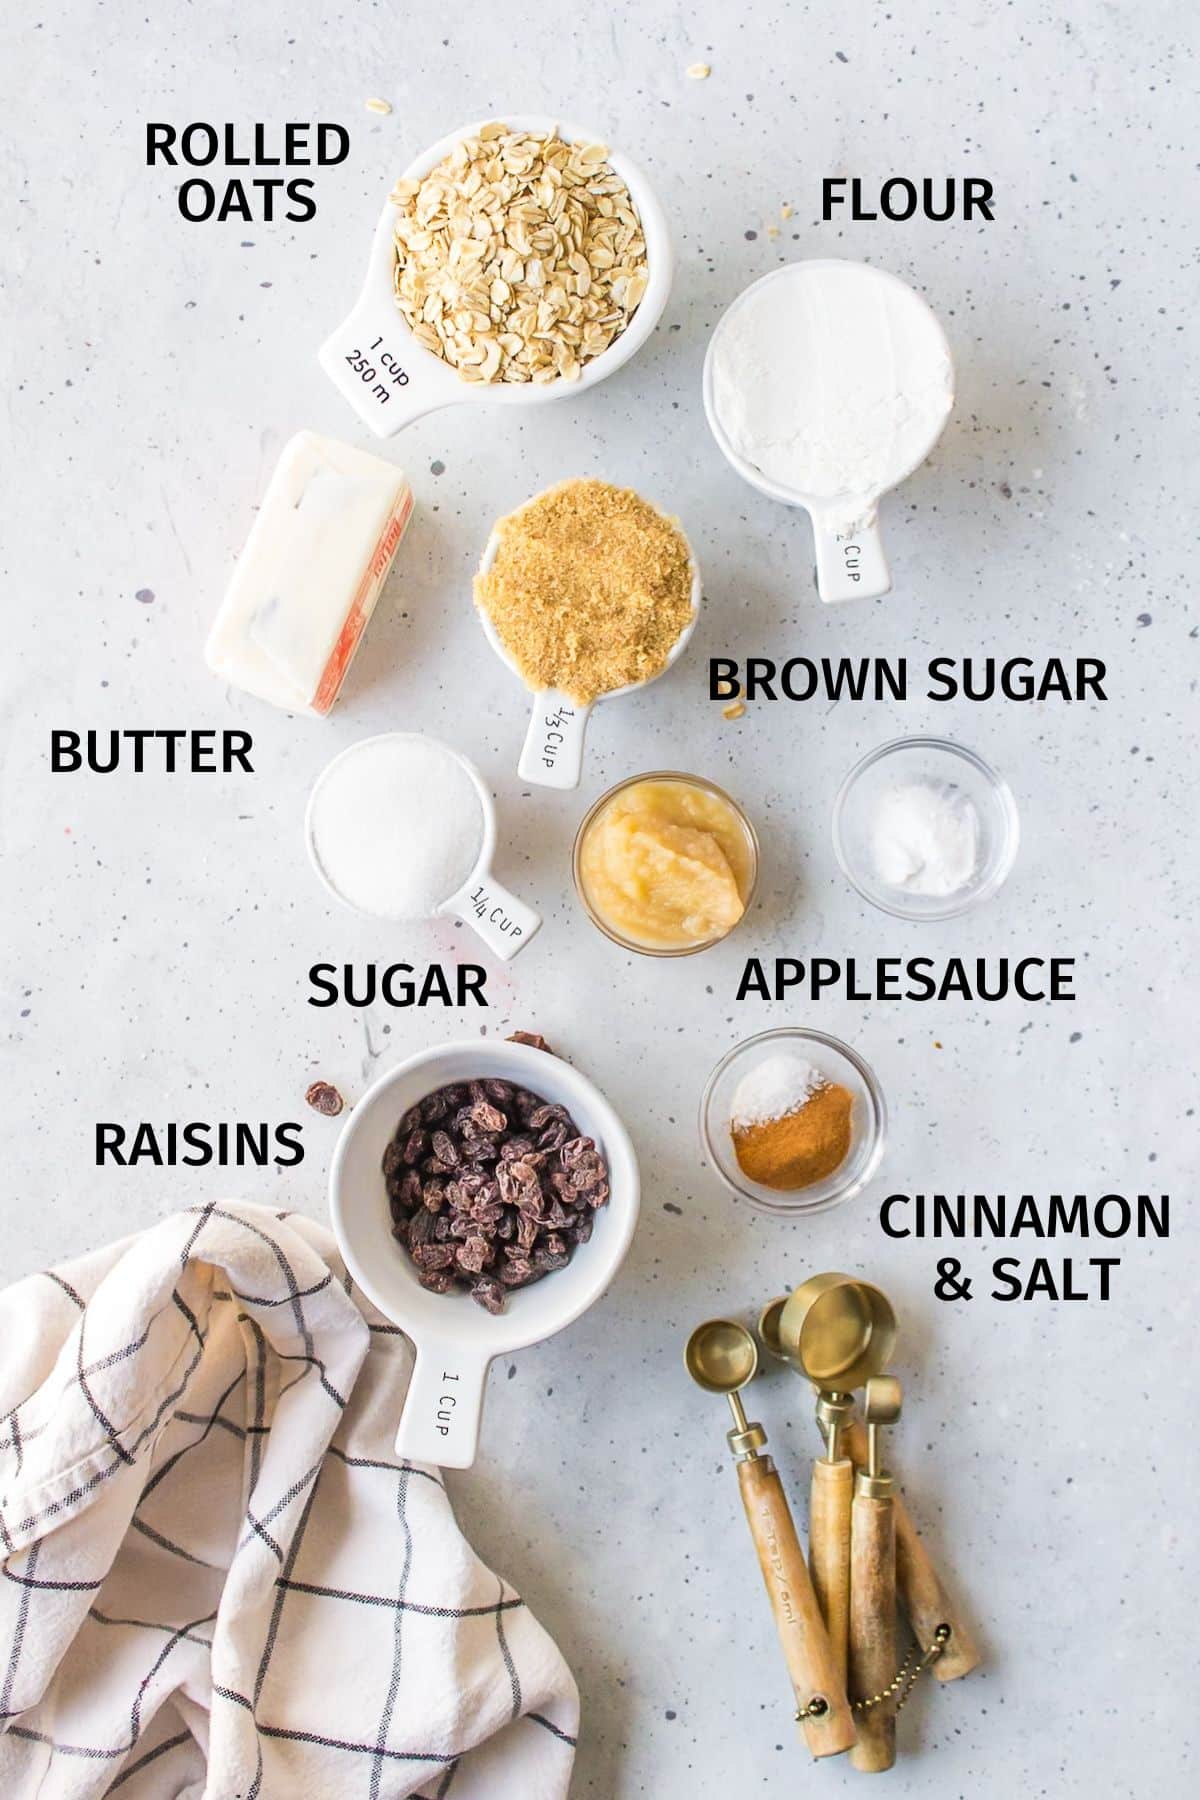 ingredients for oatmeal cookies without eggs.